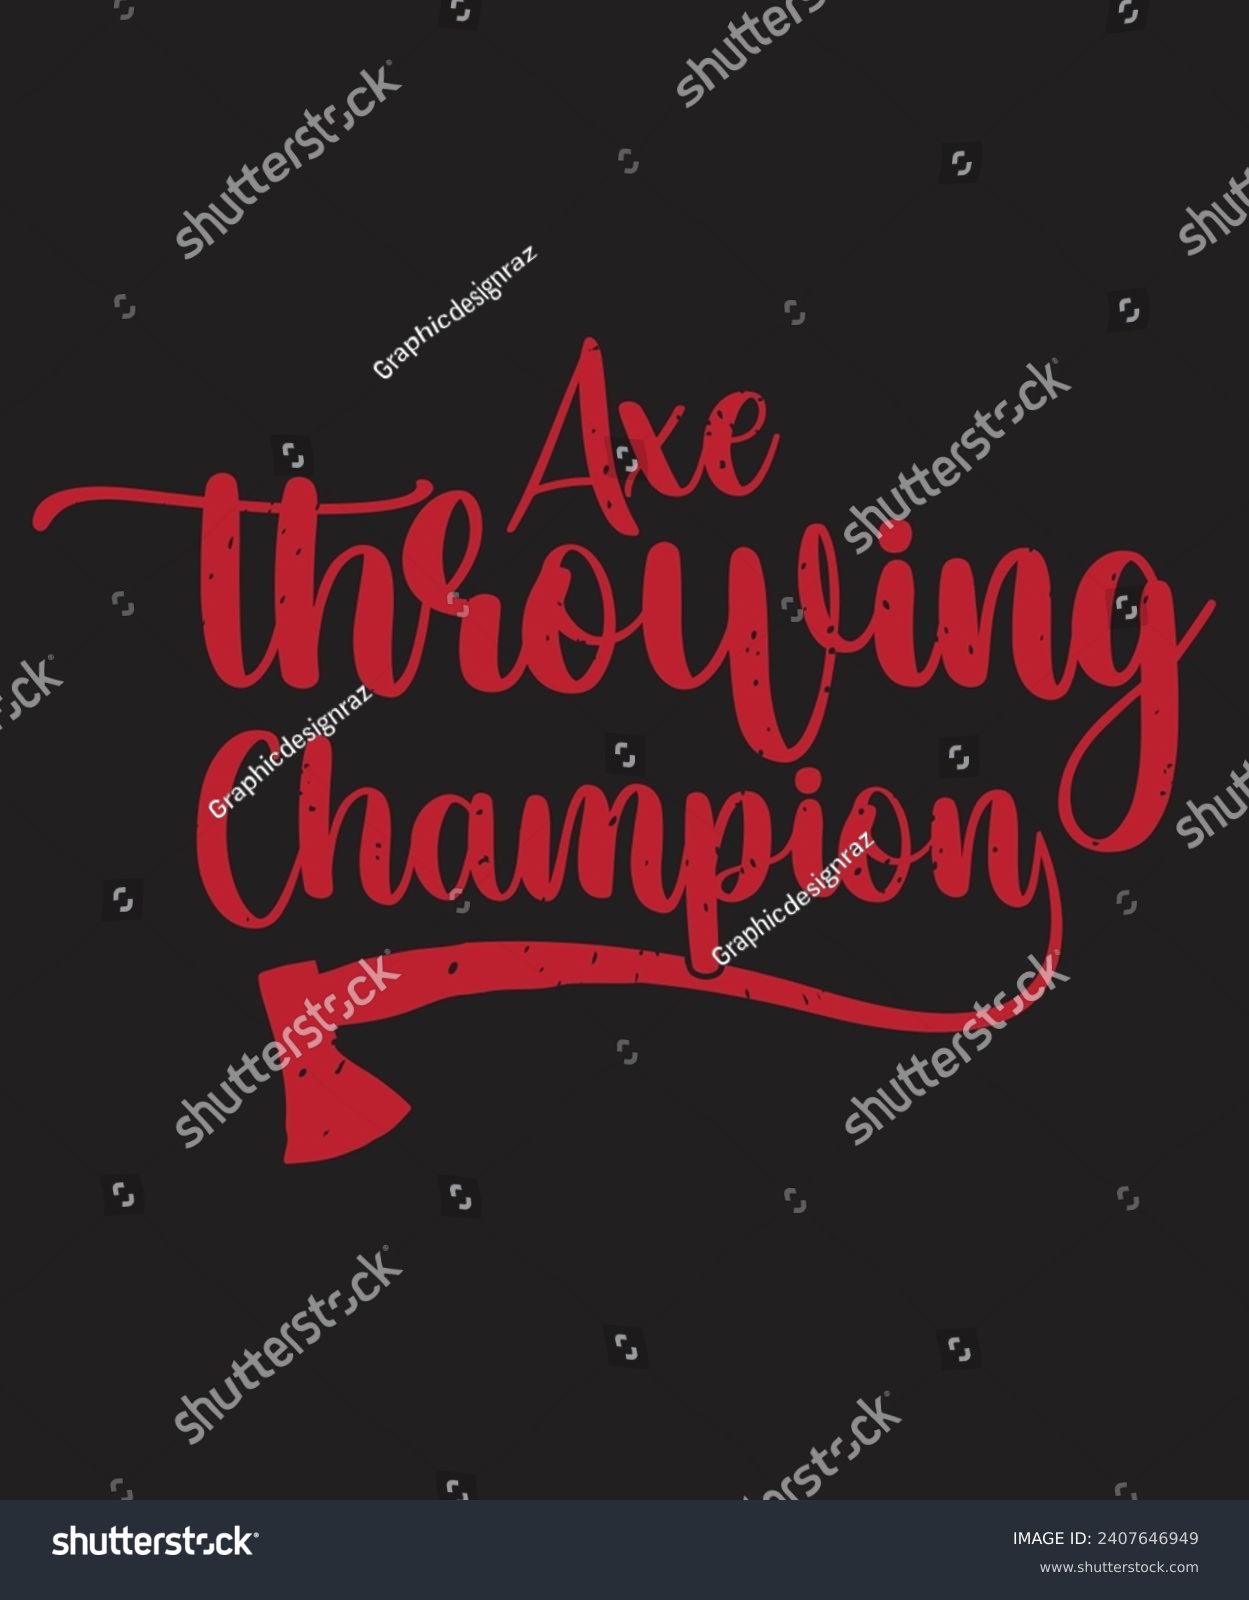 SVG of Axe throwing champion design with silhouette vector svg